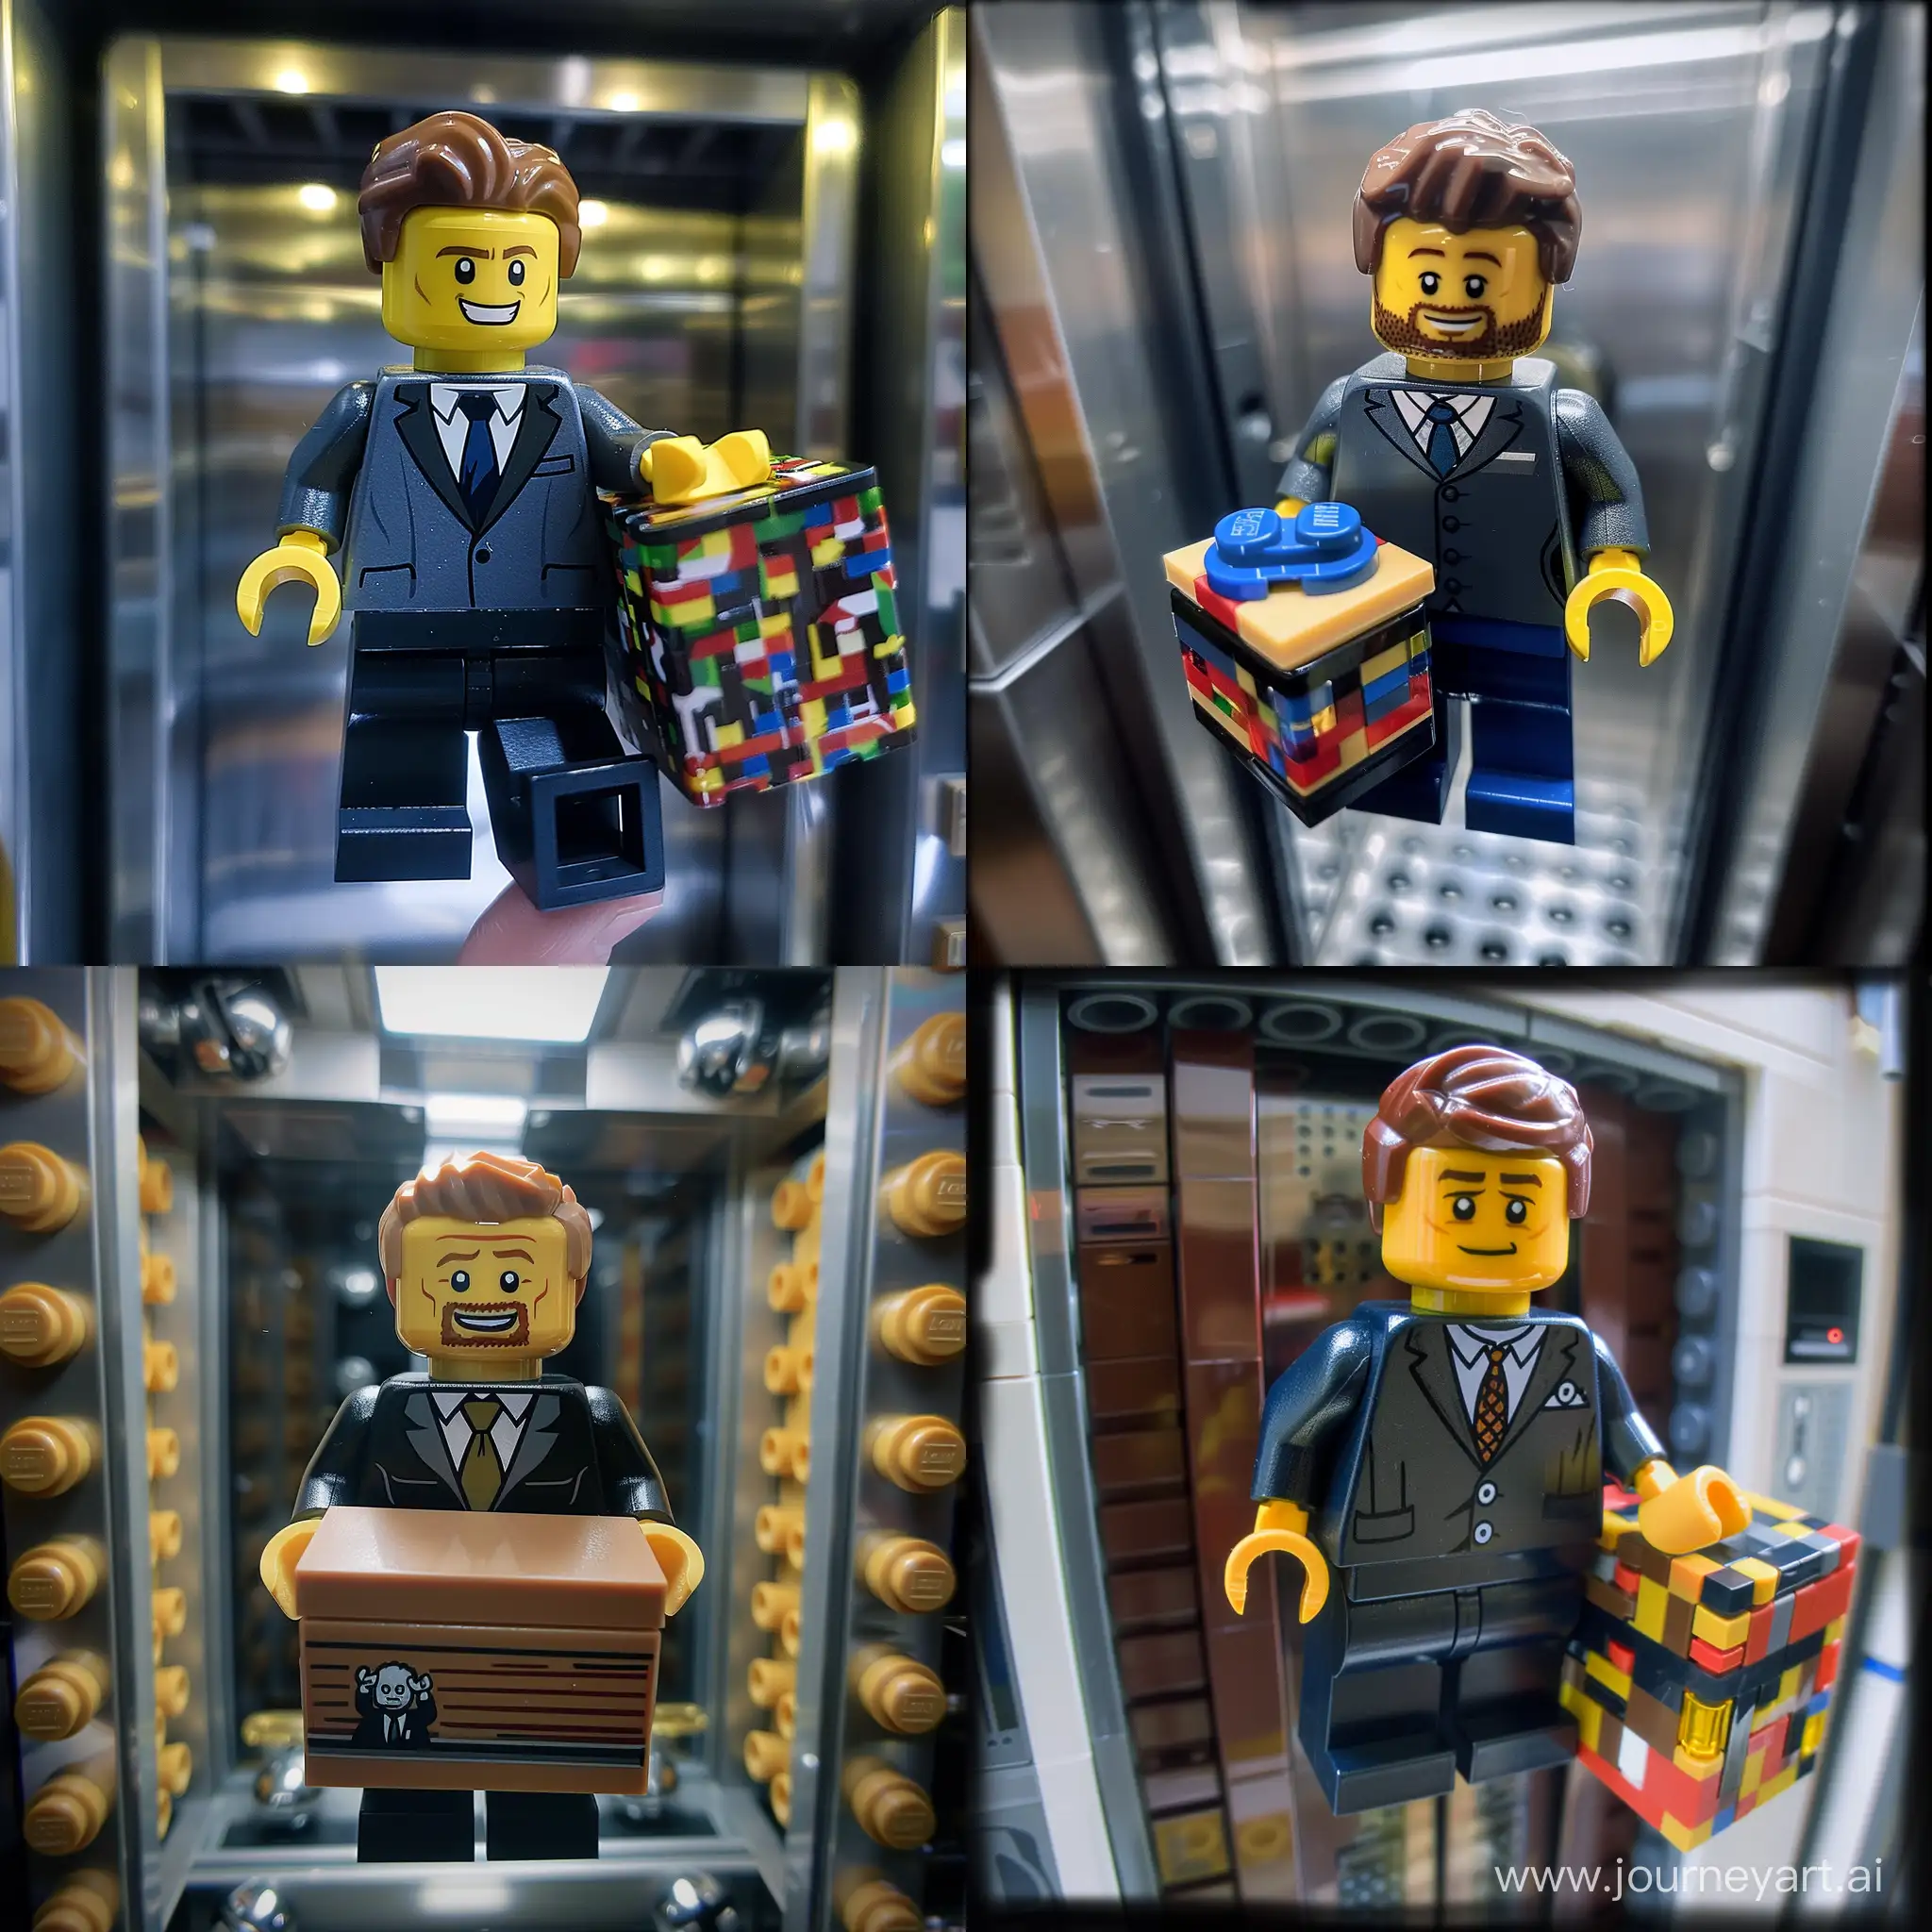 fish eye effect of the lego figure of the man in suit with bearn in the real elevator holding in the hands lego box